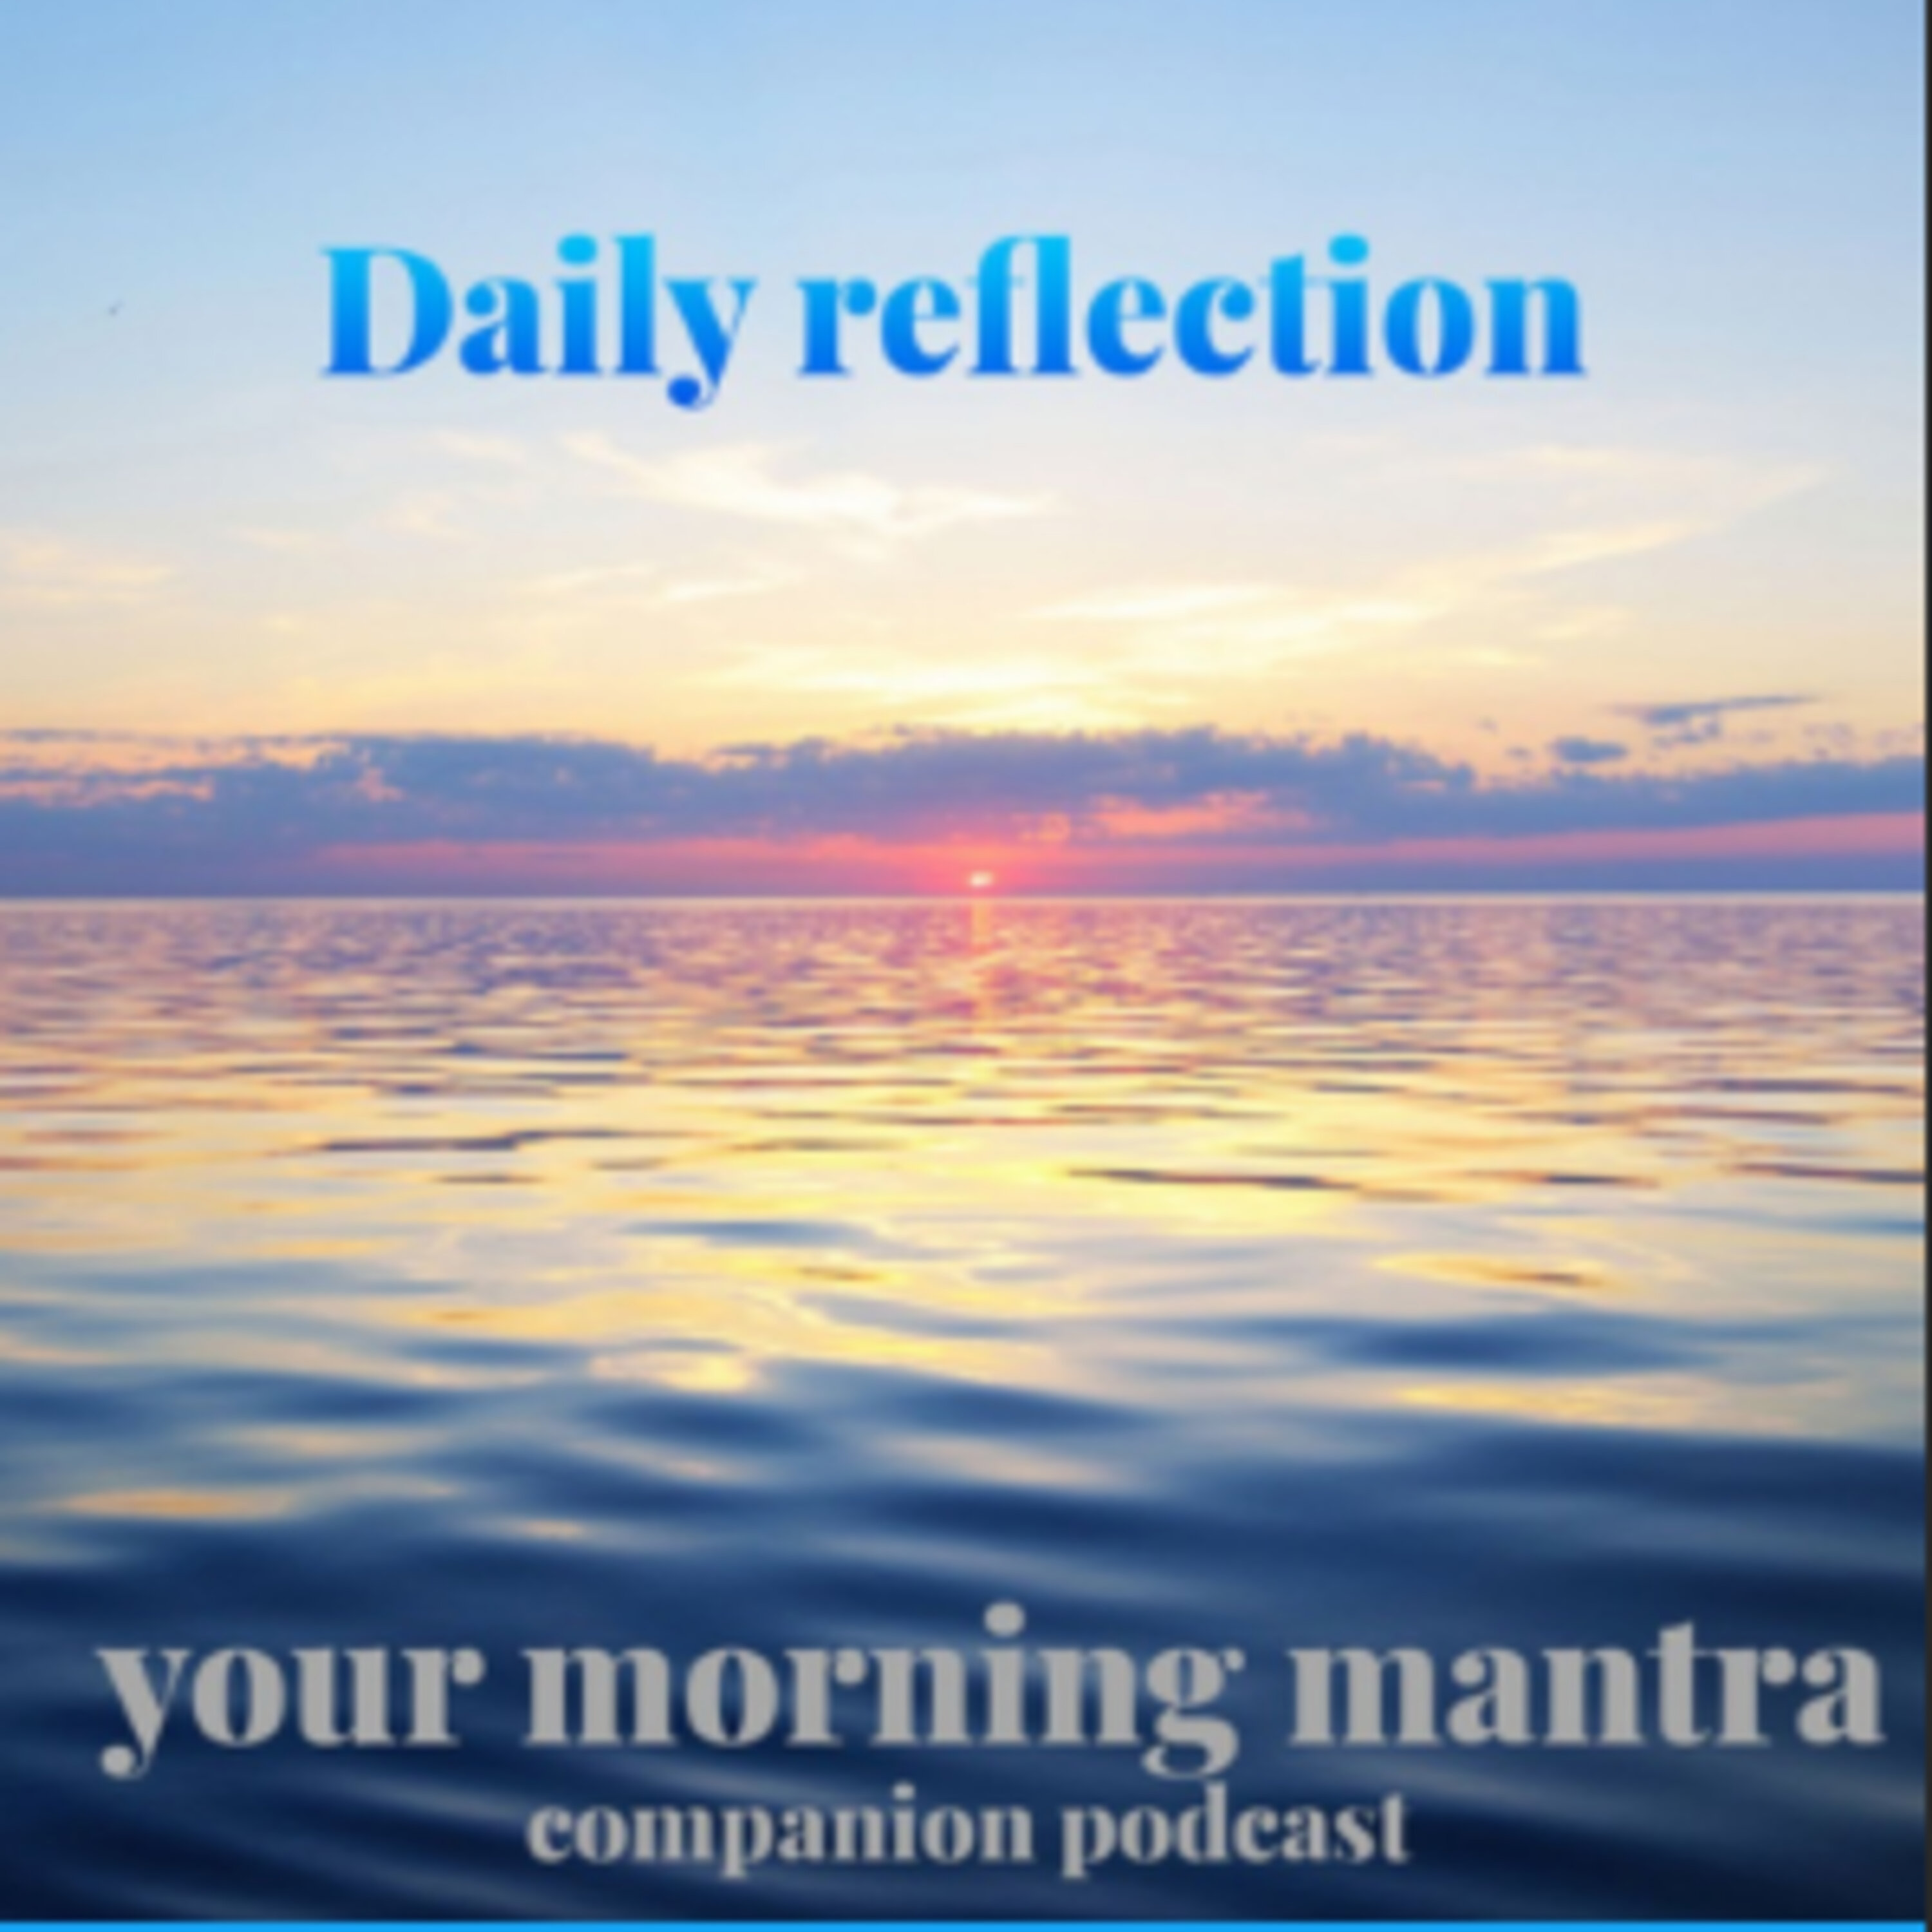 Reflection - Resting is a necessity